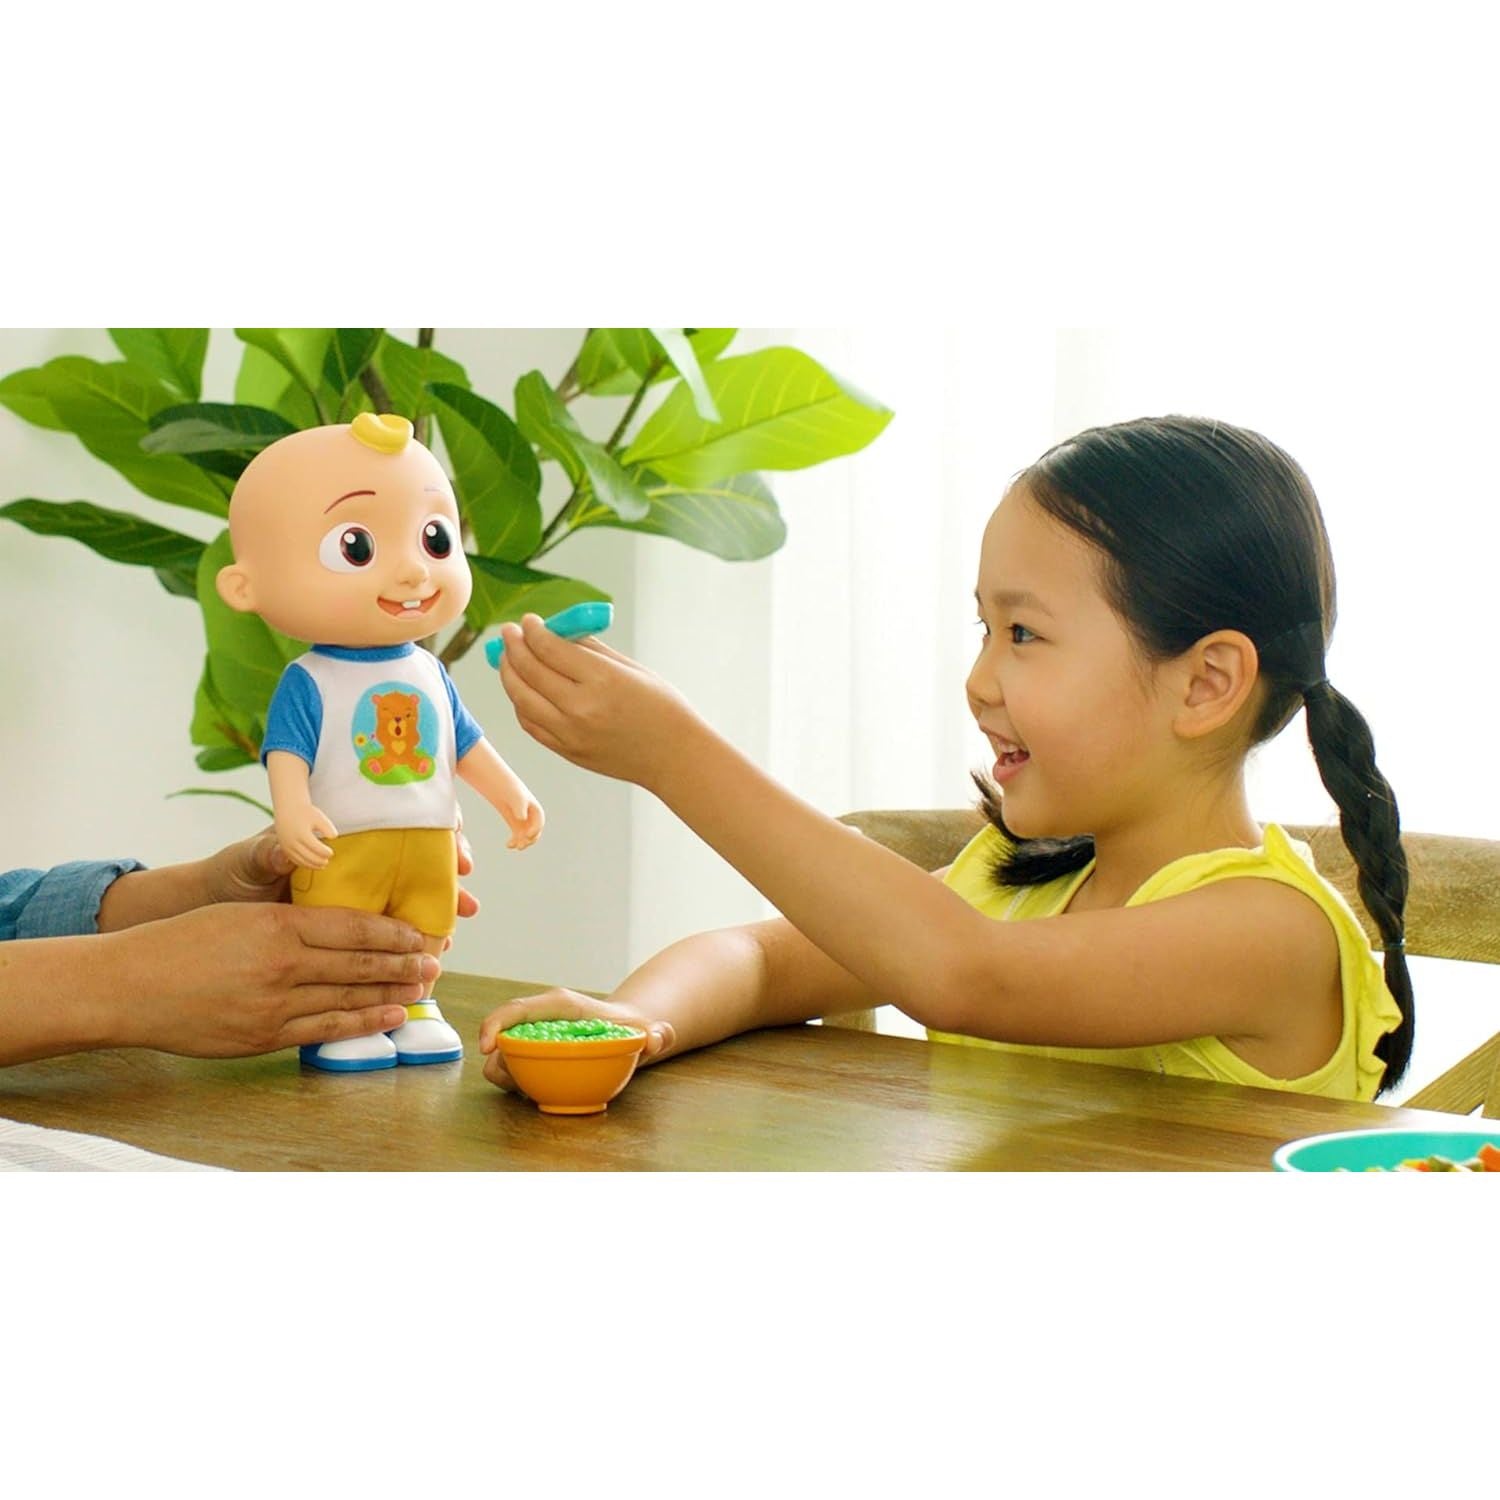 CoComelon Deluxe Interactive JJ Doll - Includes JJ, Shirt, Shorts, Pair of Shoes, Bowl of Peas, Spoon